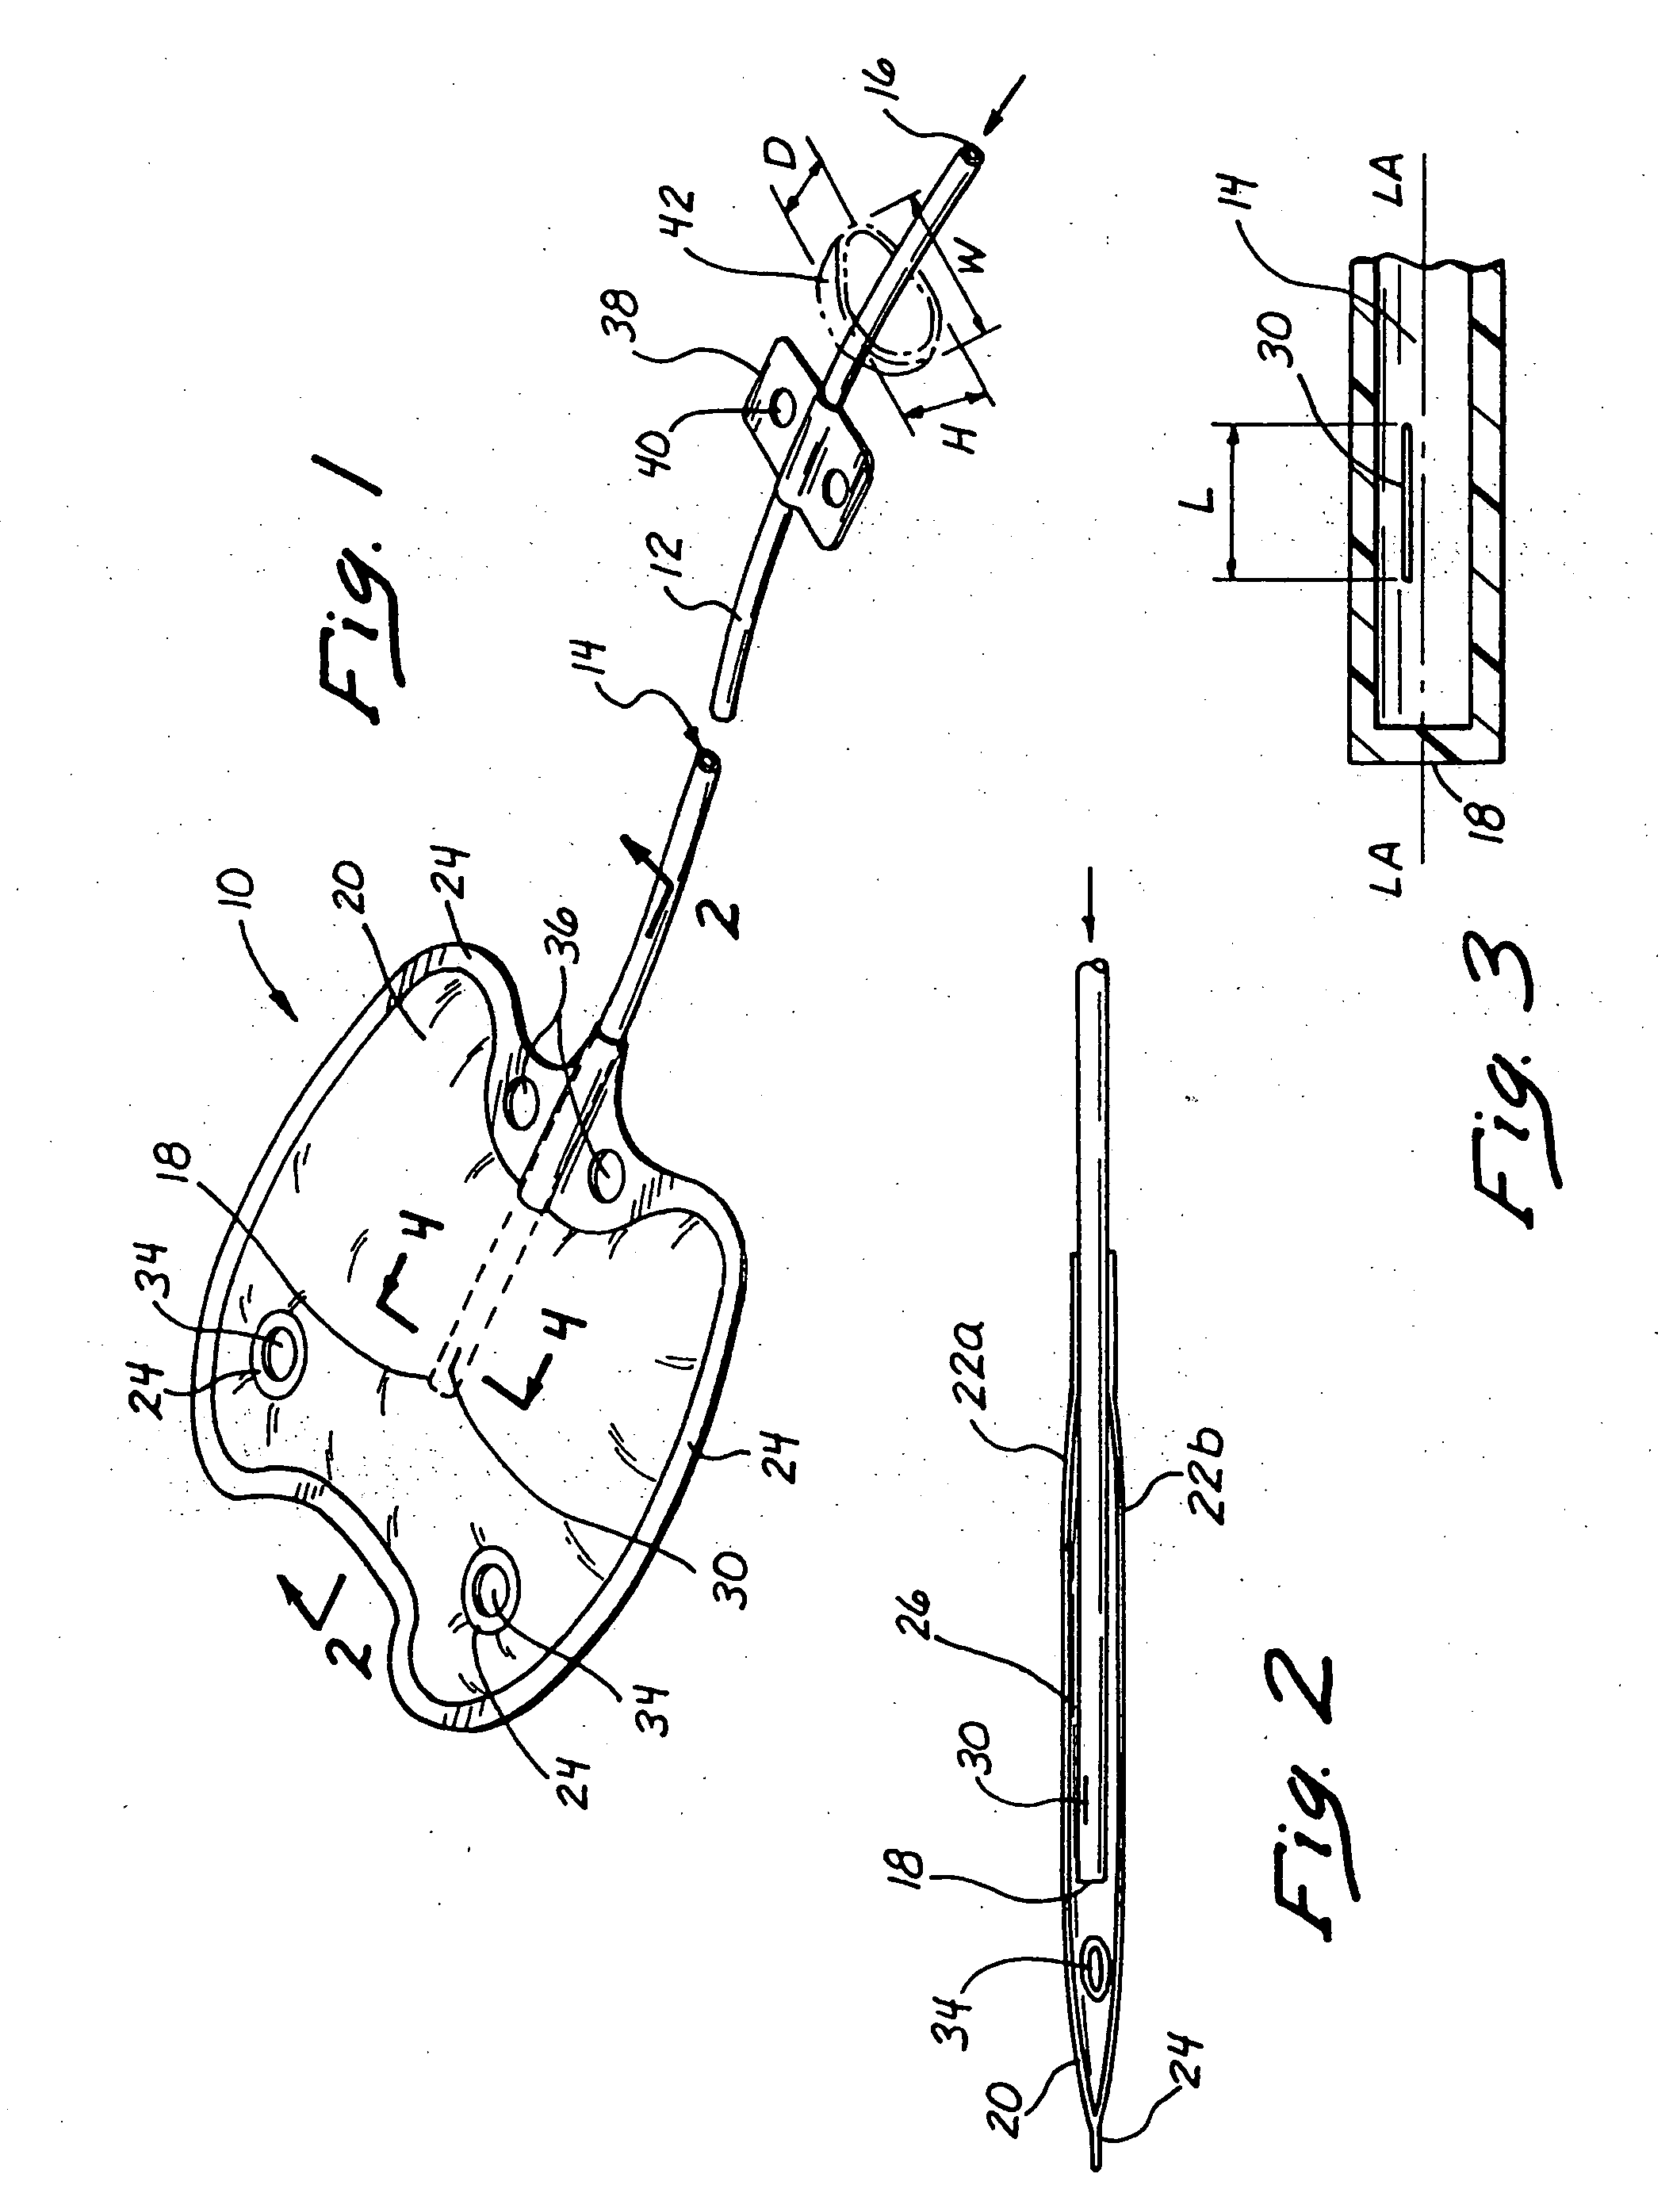 Sutureless implantable device and method for treatment of glaucoma